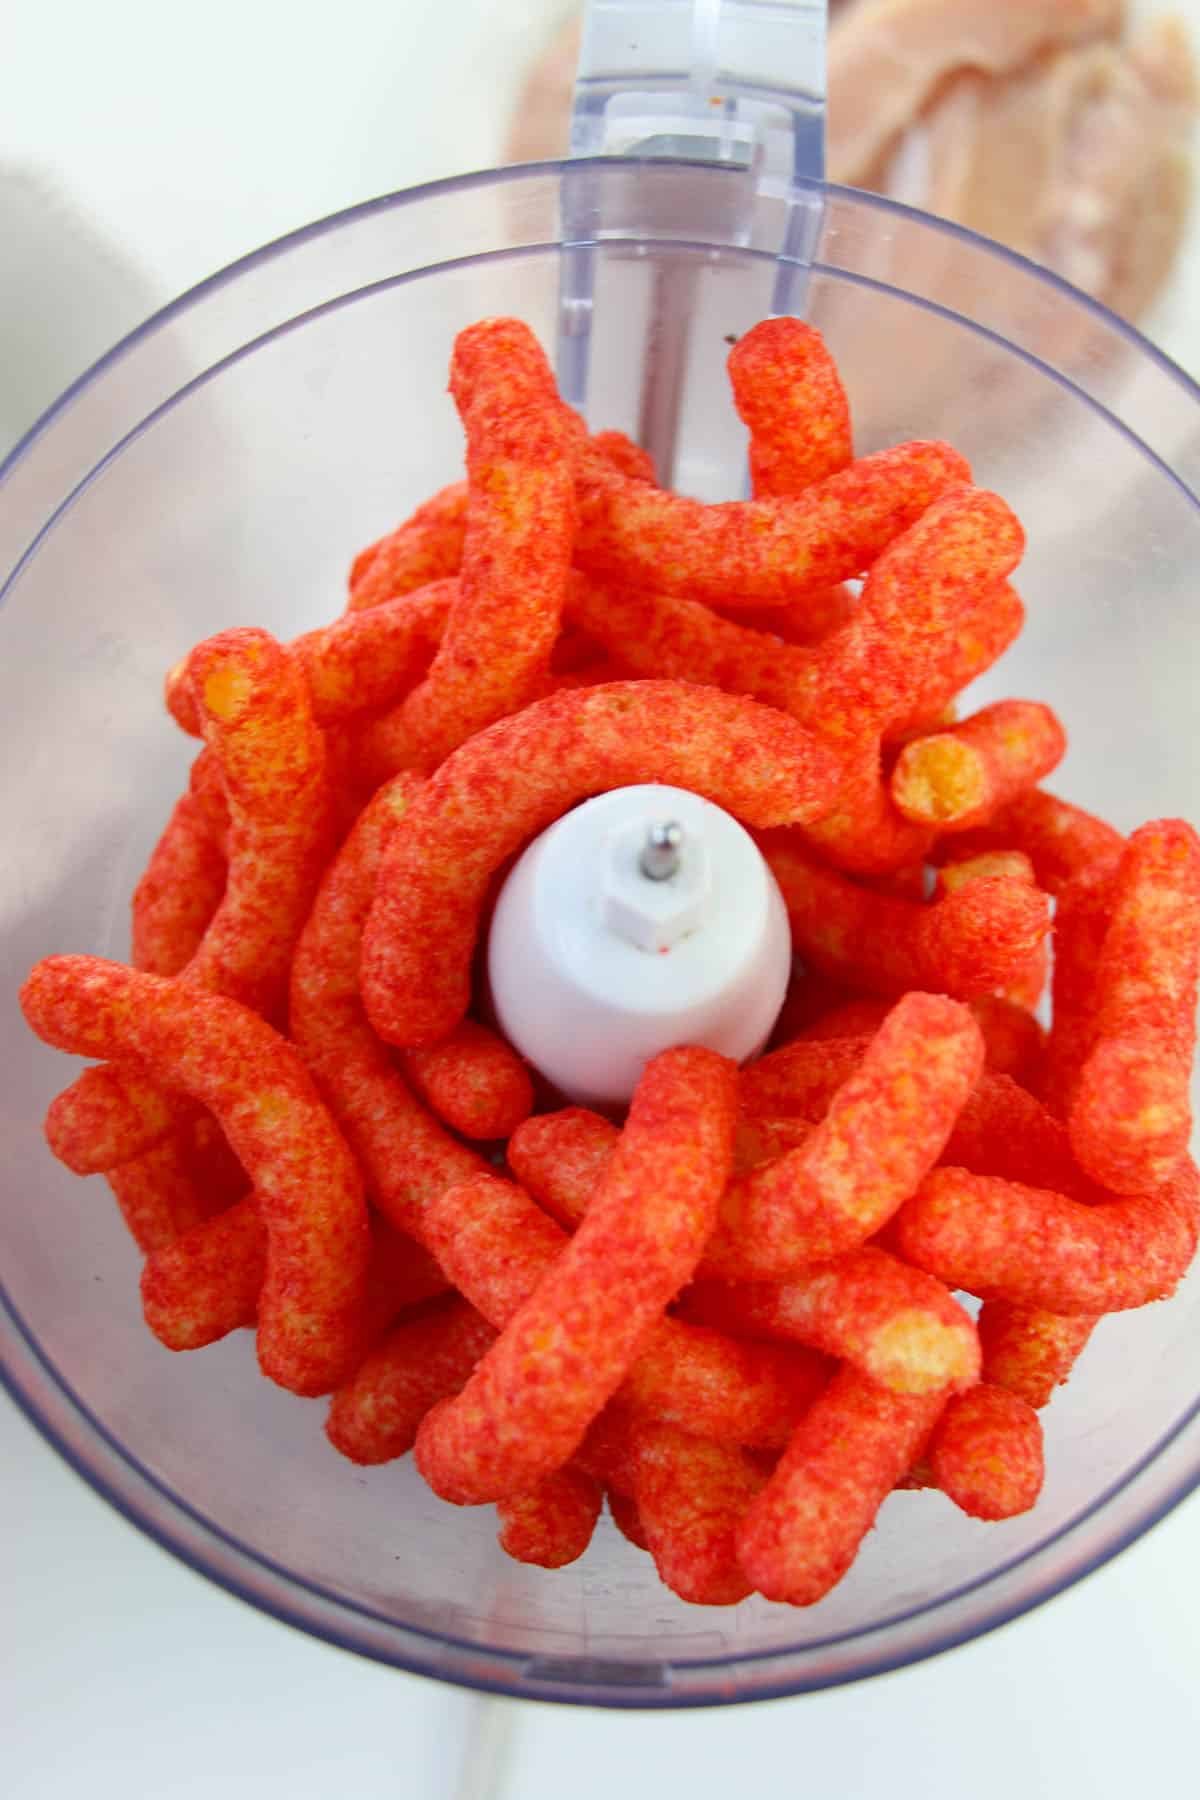 Hot Cheeto puffs in a food processor